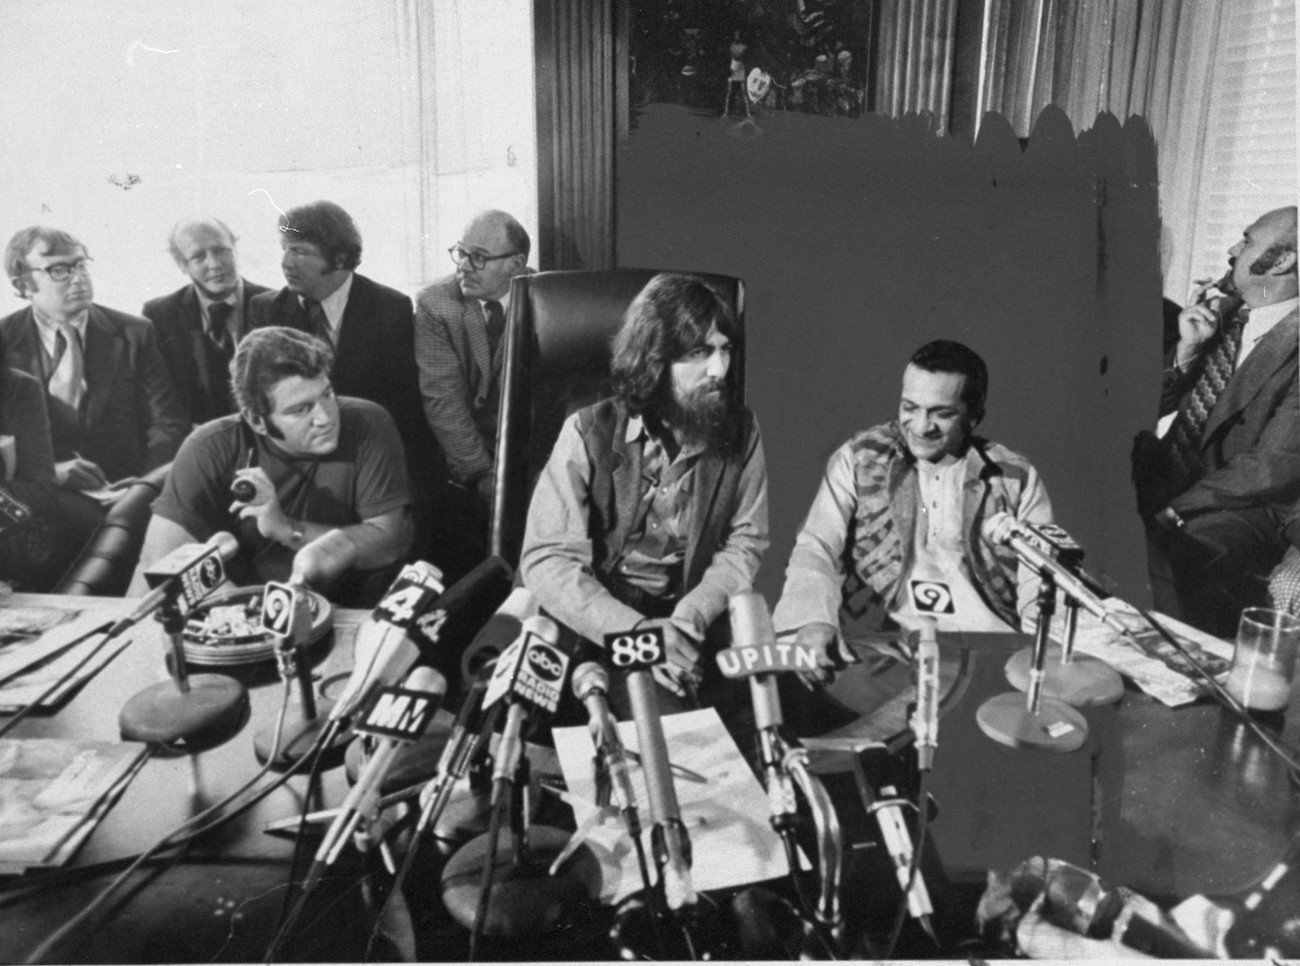 George Harrison and Ravi Shankar at a press conference for the Concert for Bangladesh.